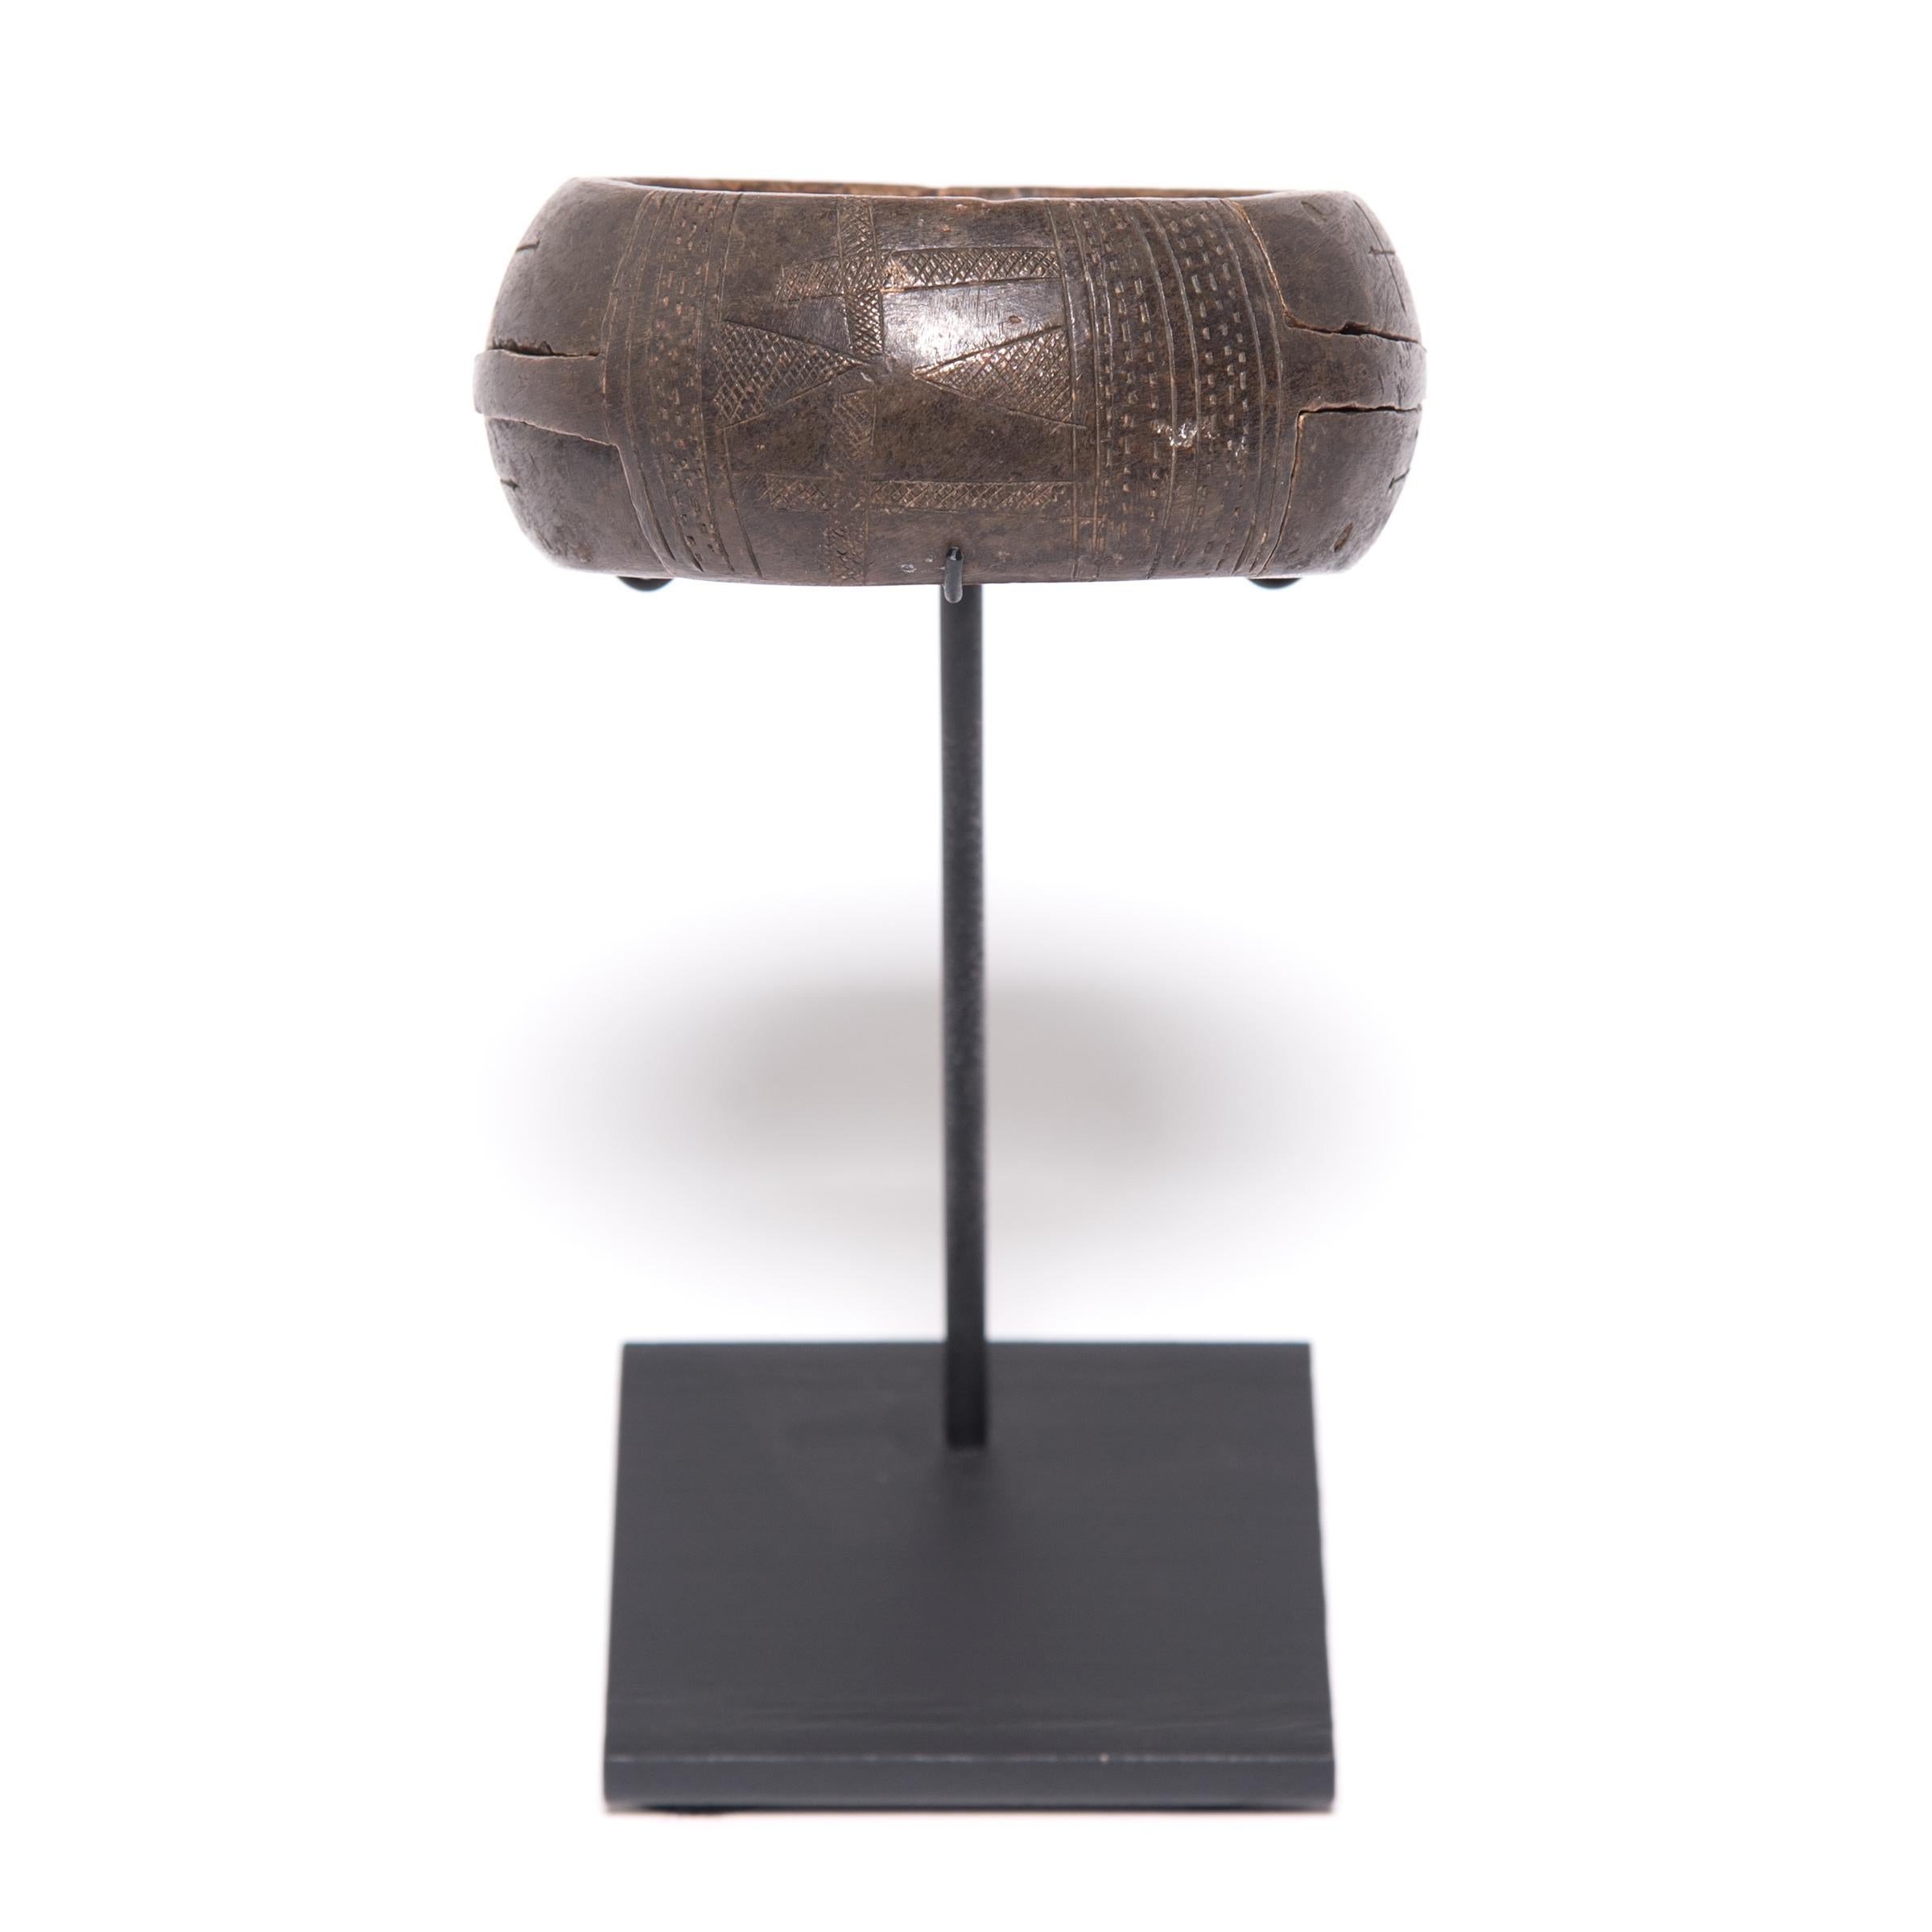 Time honored texture and form define this Nigerian copper sculptural object. The intricate geometry was achieved through a process known as scarification. The artisan would meticulously trace and retrace their carvings to create the definition and